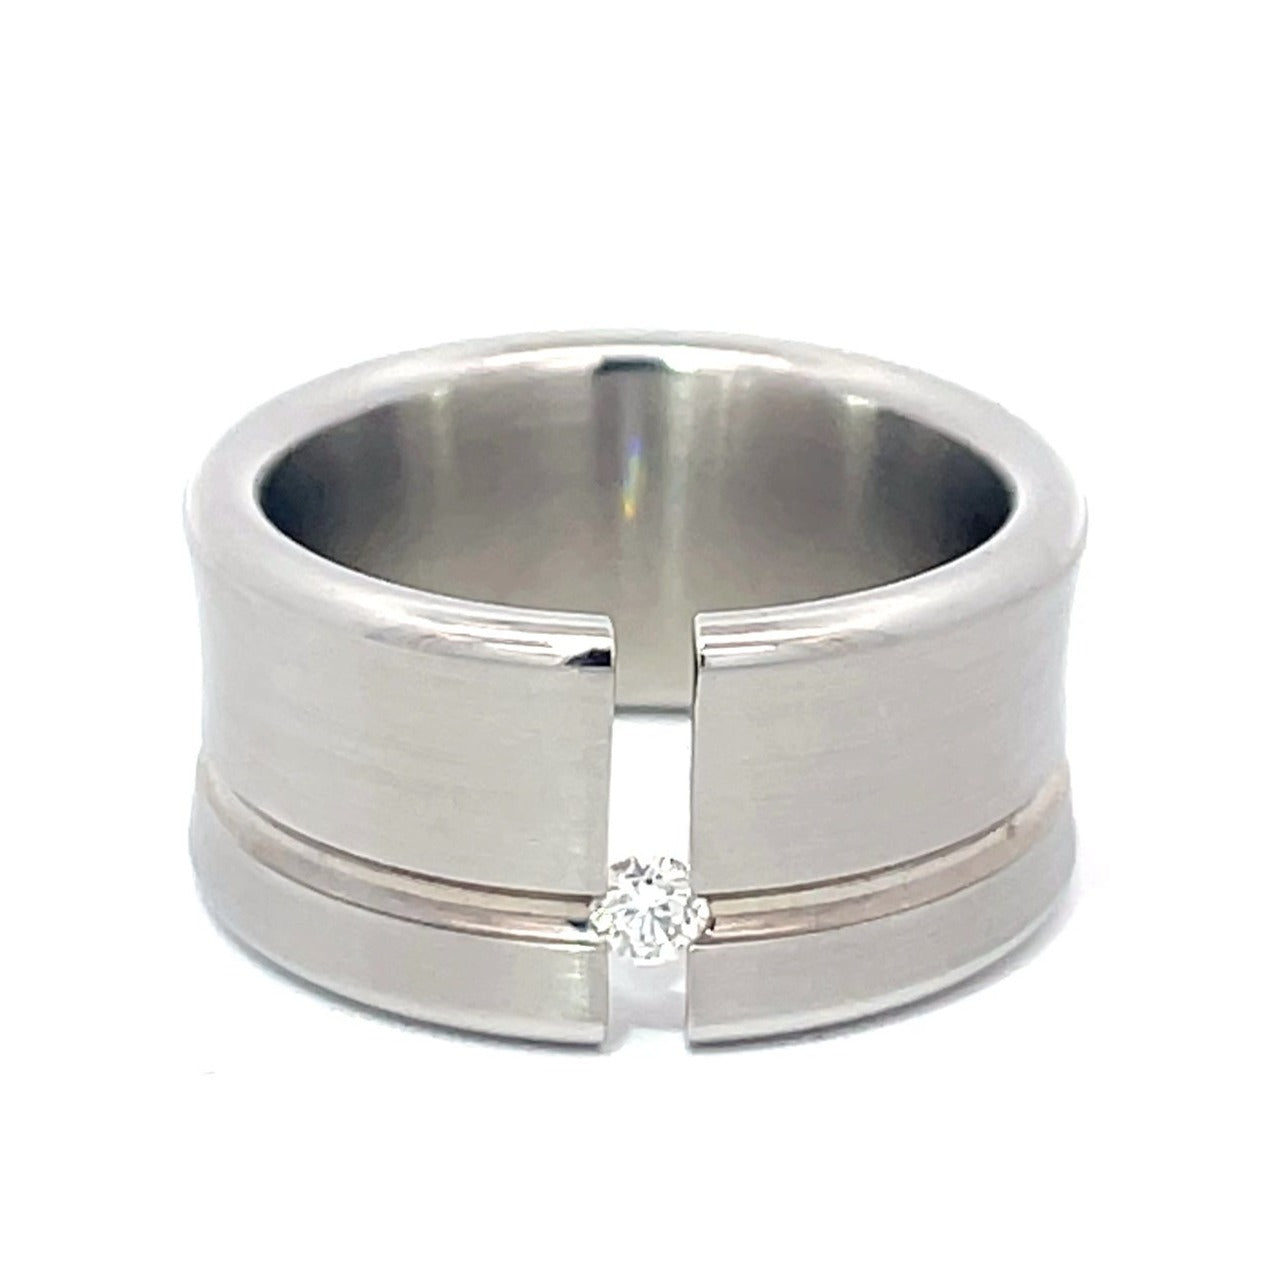 12mm Stainless Steel Tension Set Diamond Ring Size S